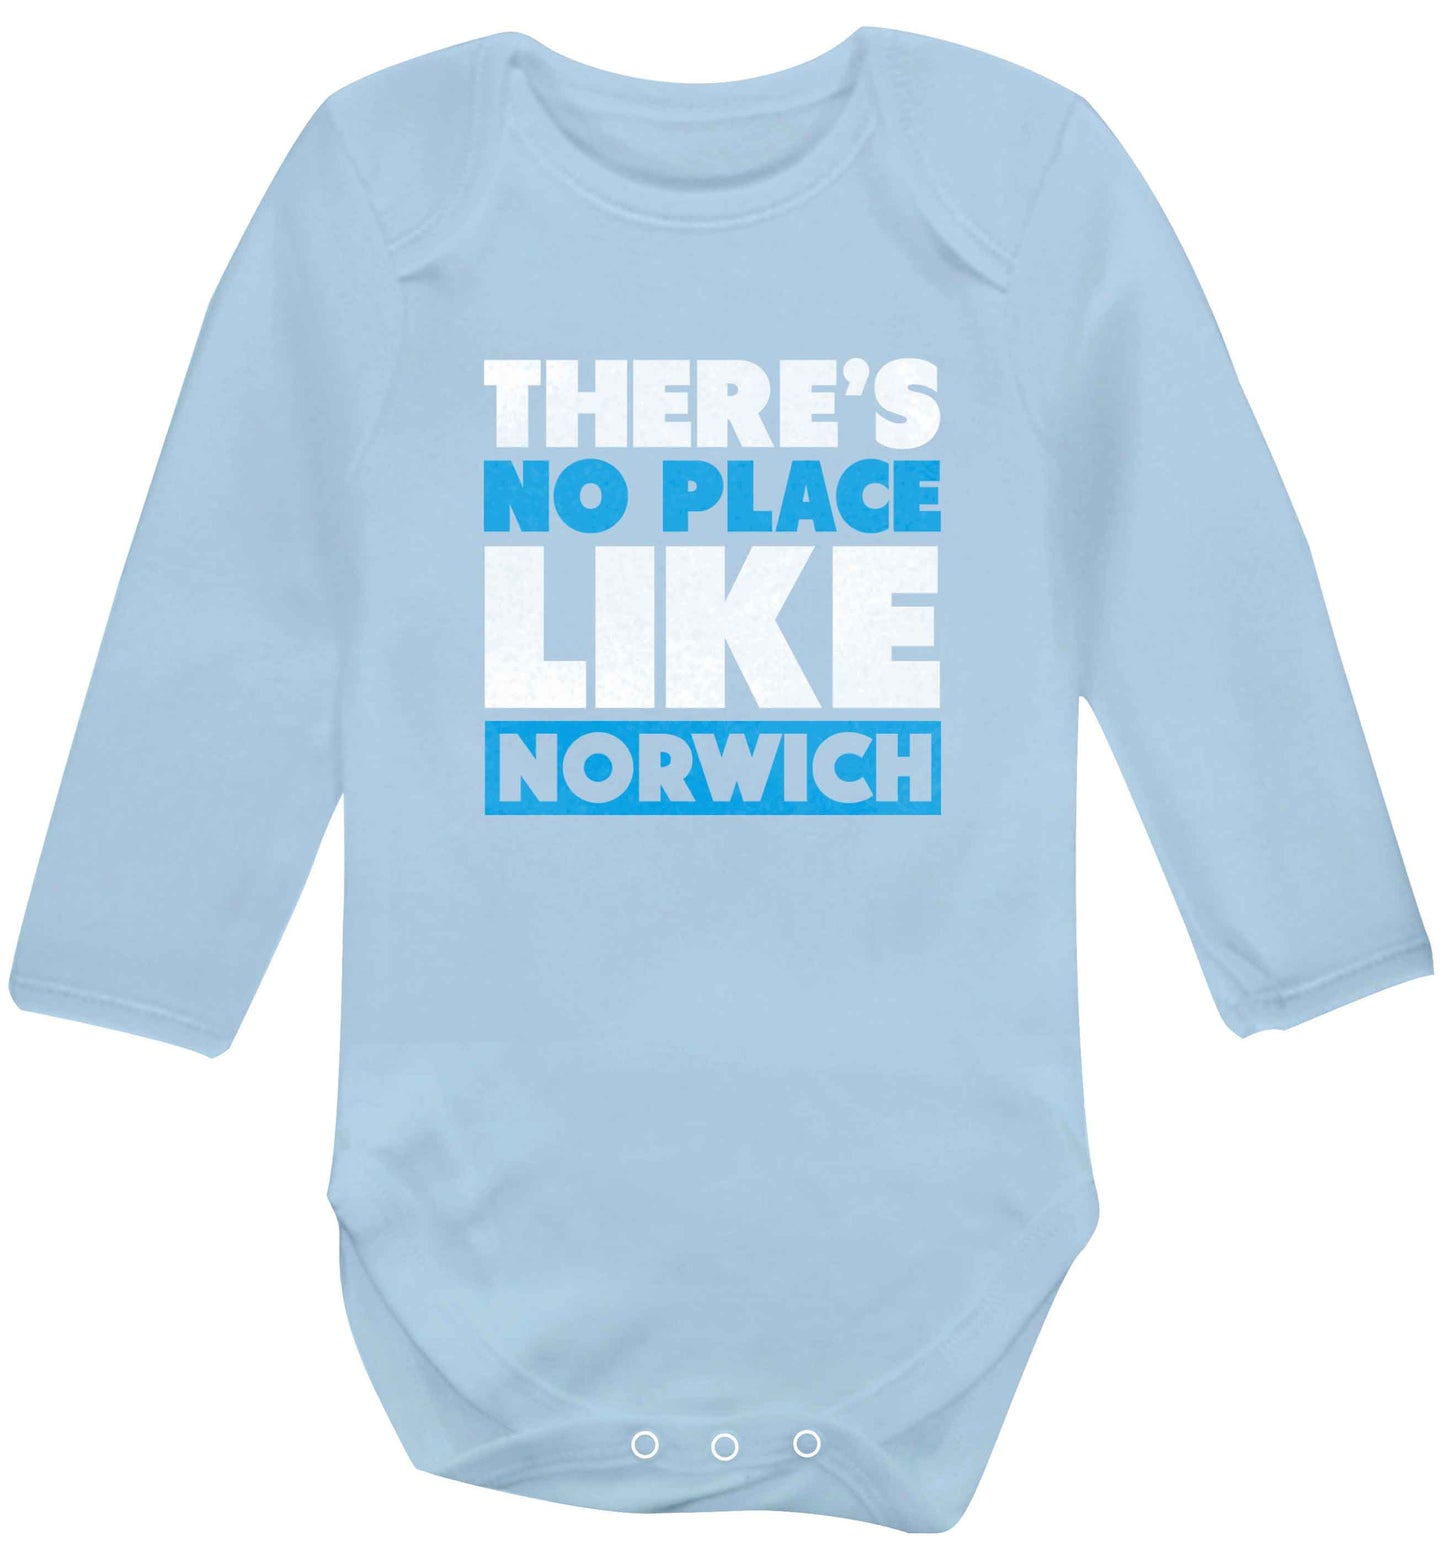 There's no place like Norwich baby vest long sleeved pale blue 6-12 months